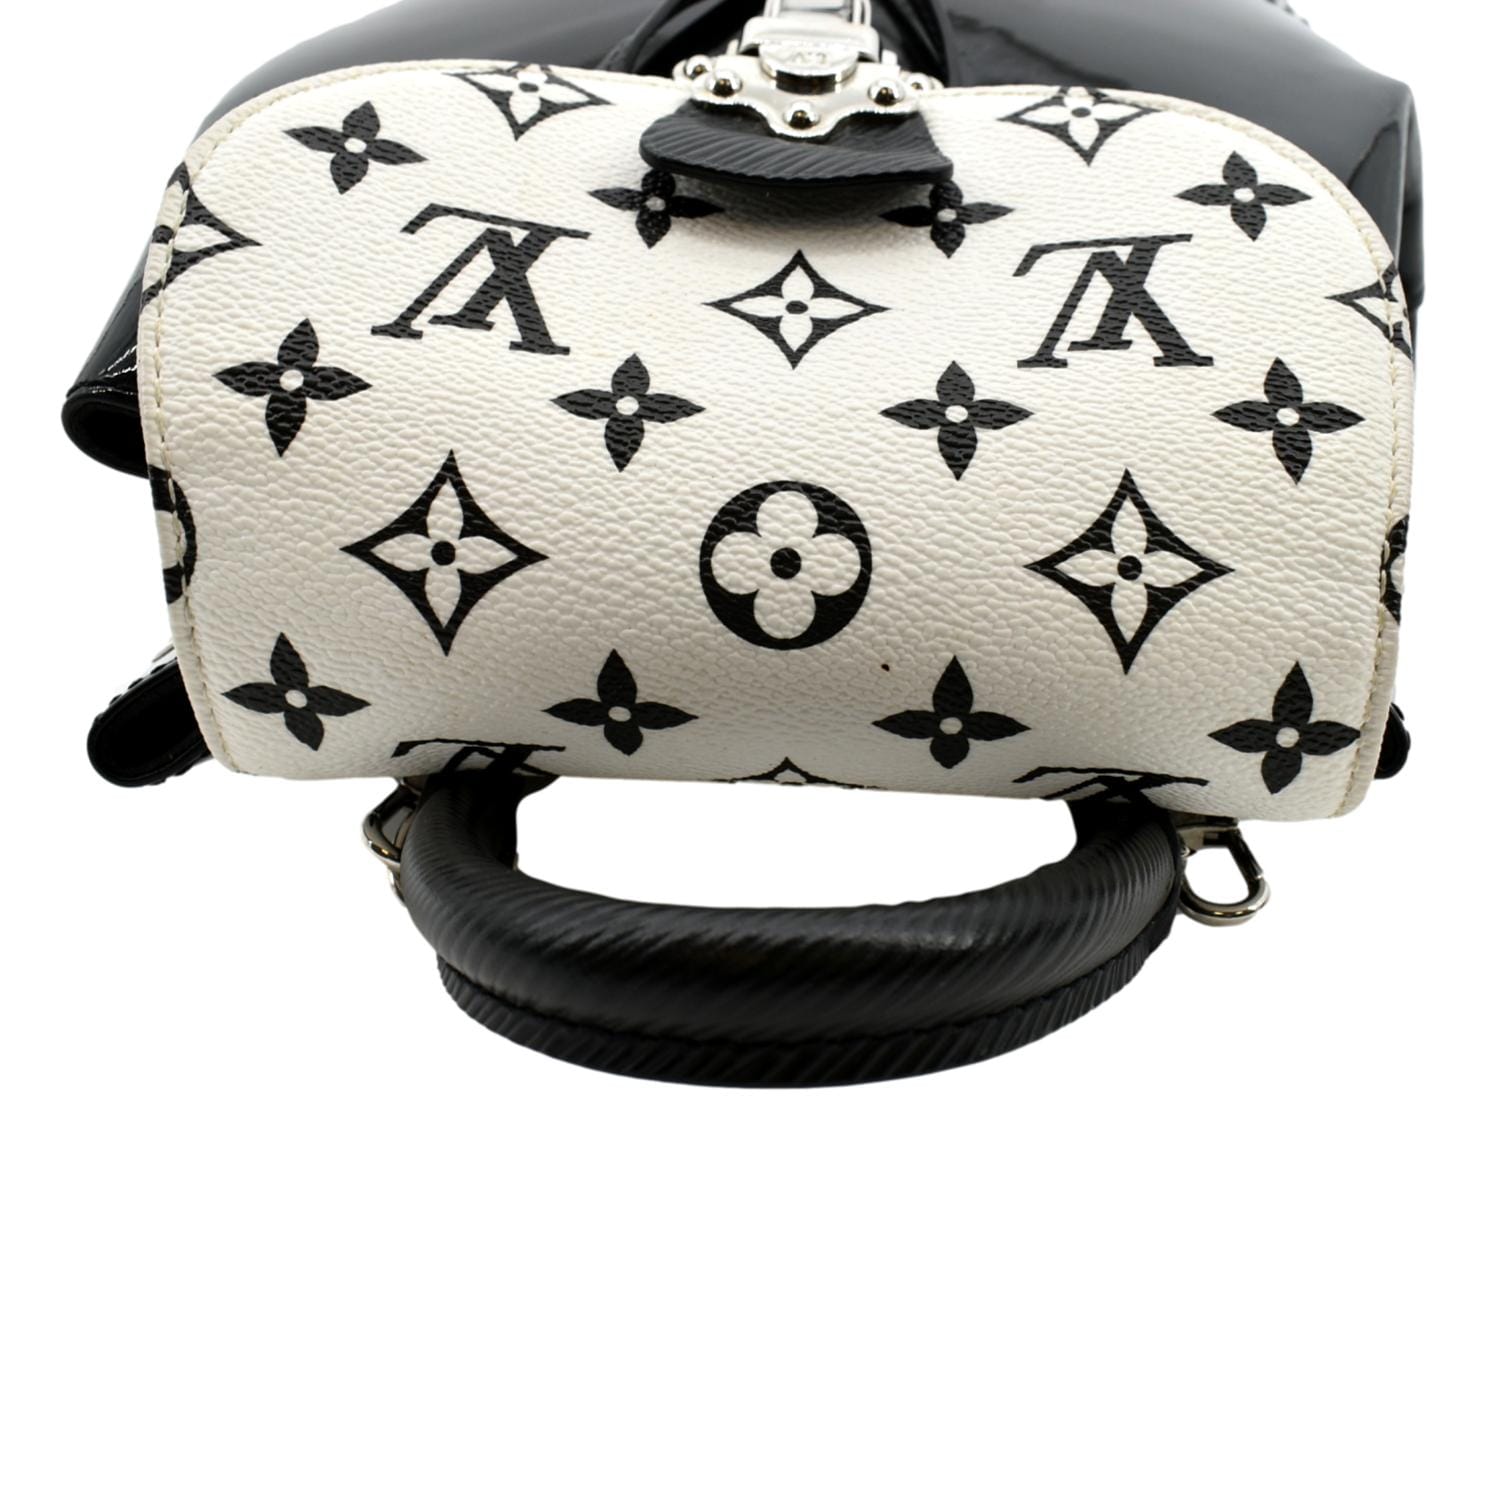 Louis Vuitton Hot Springs Backpack White Monogram And Patent Leather Auction